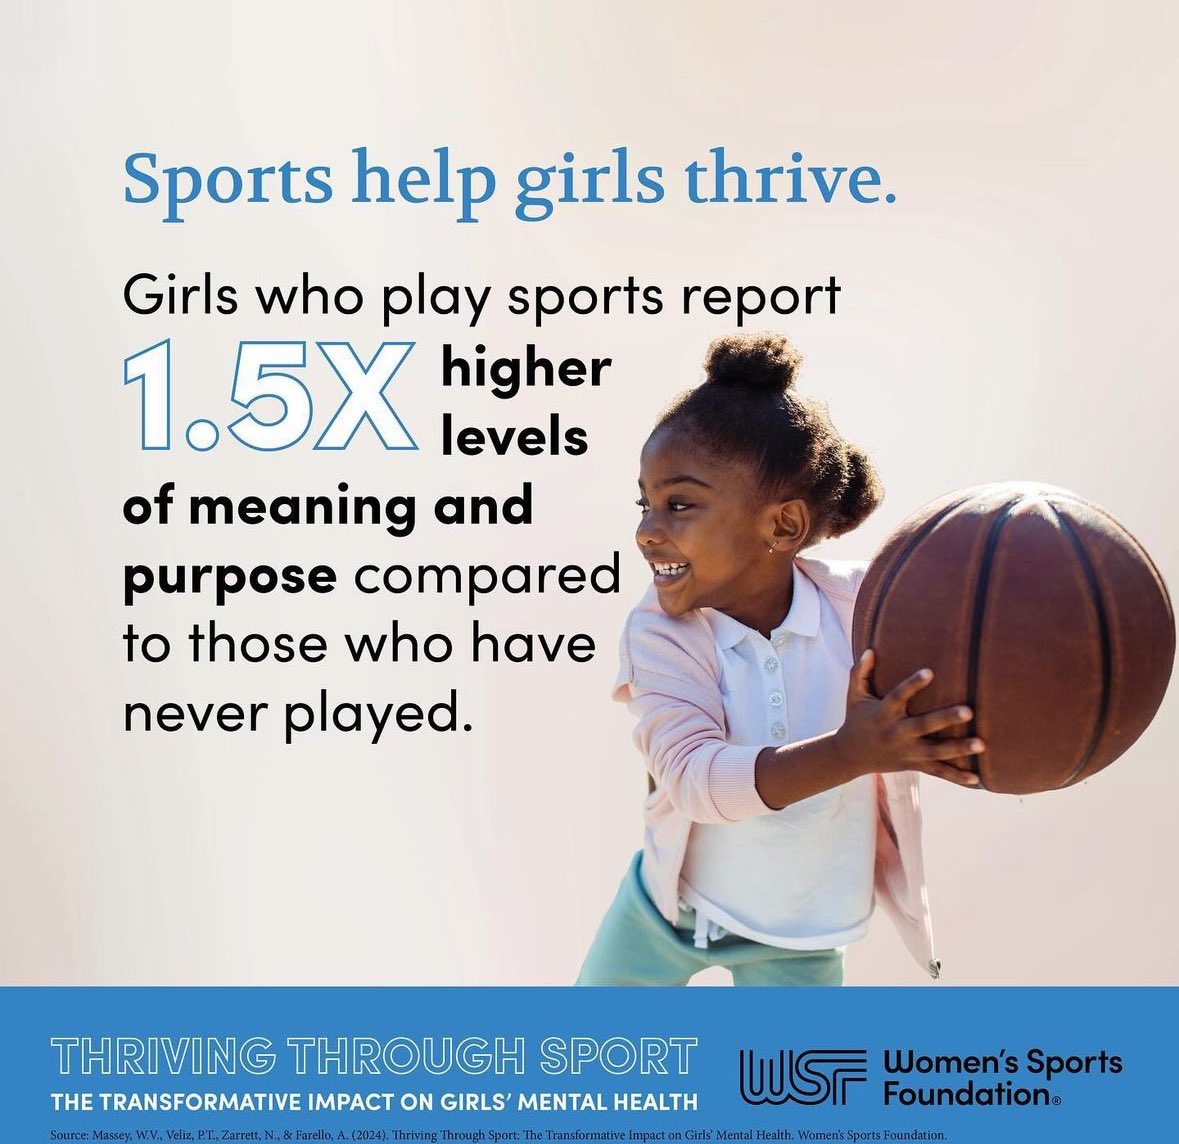 In time for #MentalHealthAwarenessMonth, the @WomensSportsFdn has released a new research report “Thriving Through Sport: The Transformative Impact on Girls’ Mental Health” that shows when girls play sports, they physically AND mentally benefit. Learn more at our in bio.